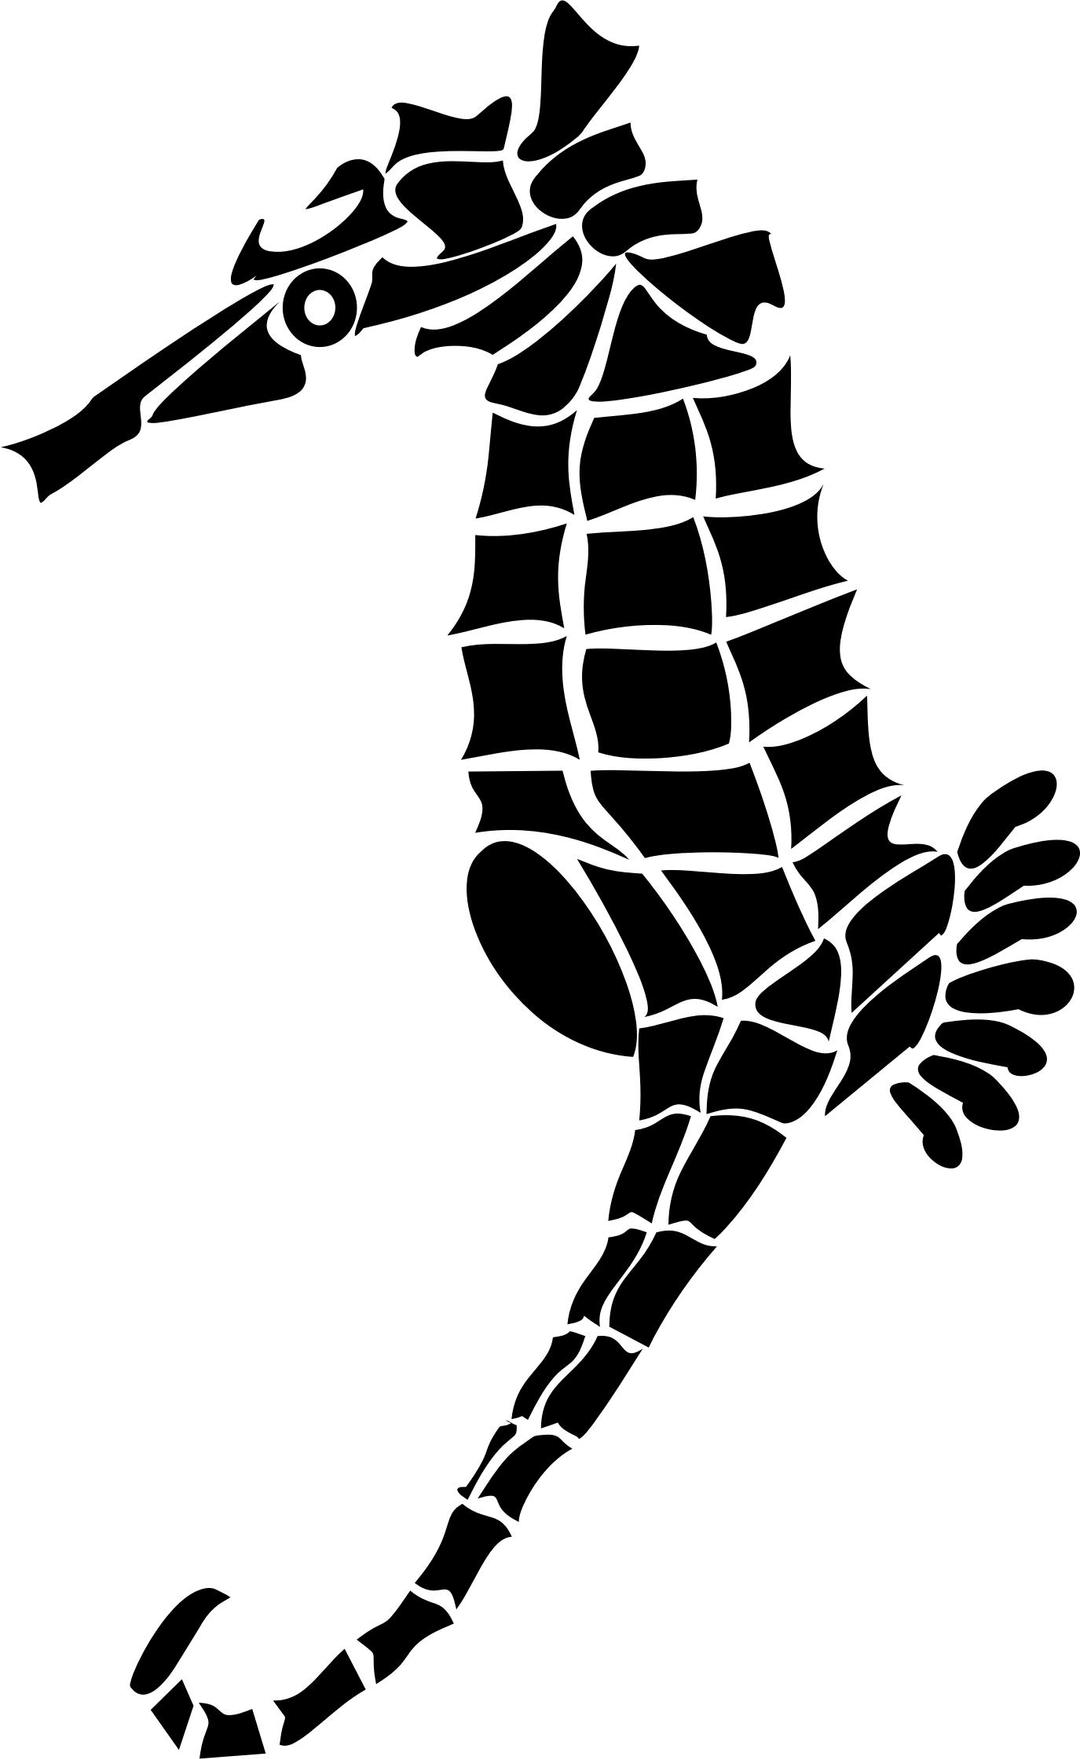 Stylized Seahorse Silhouette png transparent